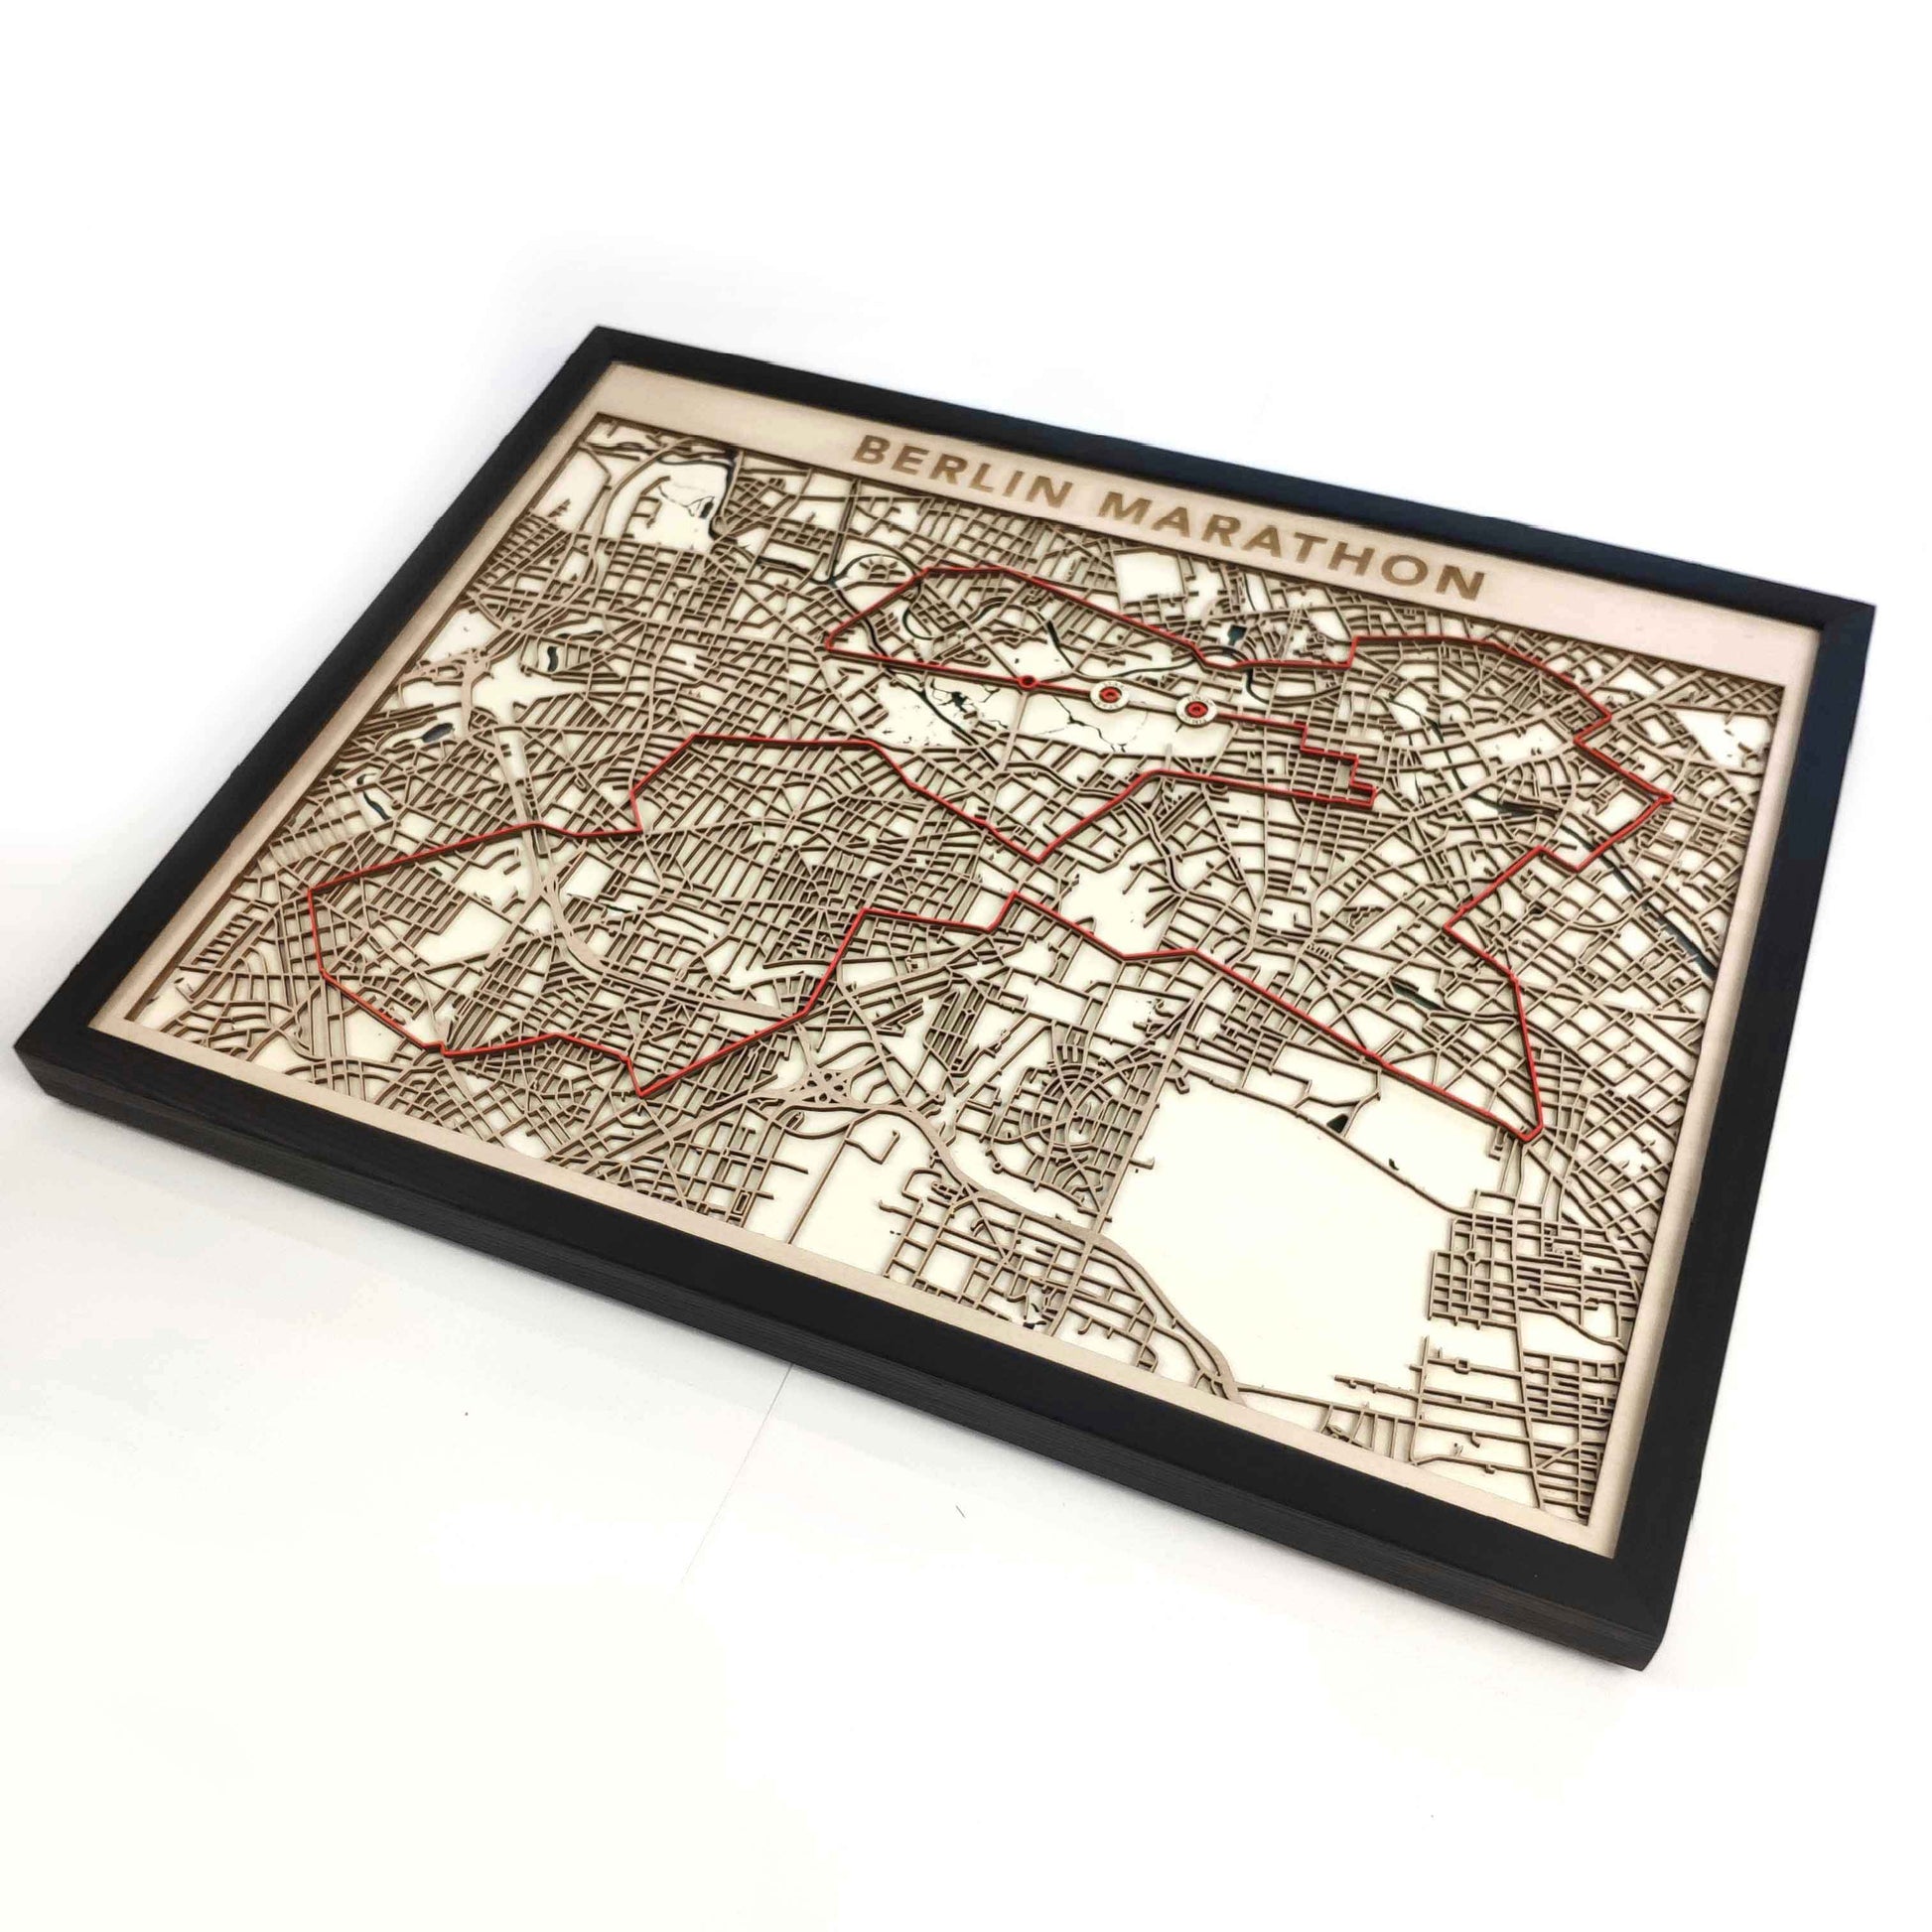 Berlin Marathon Course Map - Wall Art Gift by CityWood - Custom Wood Map Art - Unique Laser Cut Engraved - Anniversary Gift